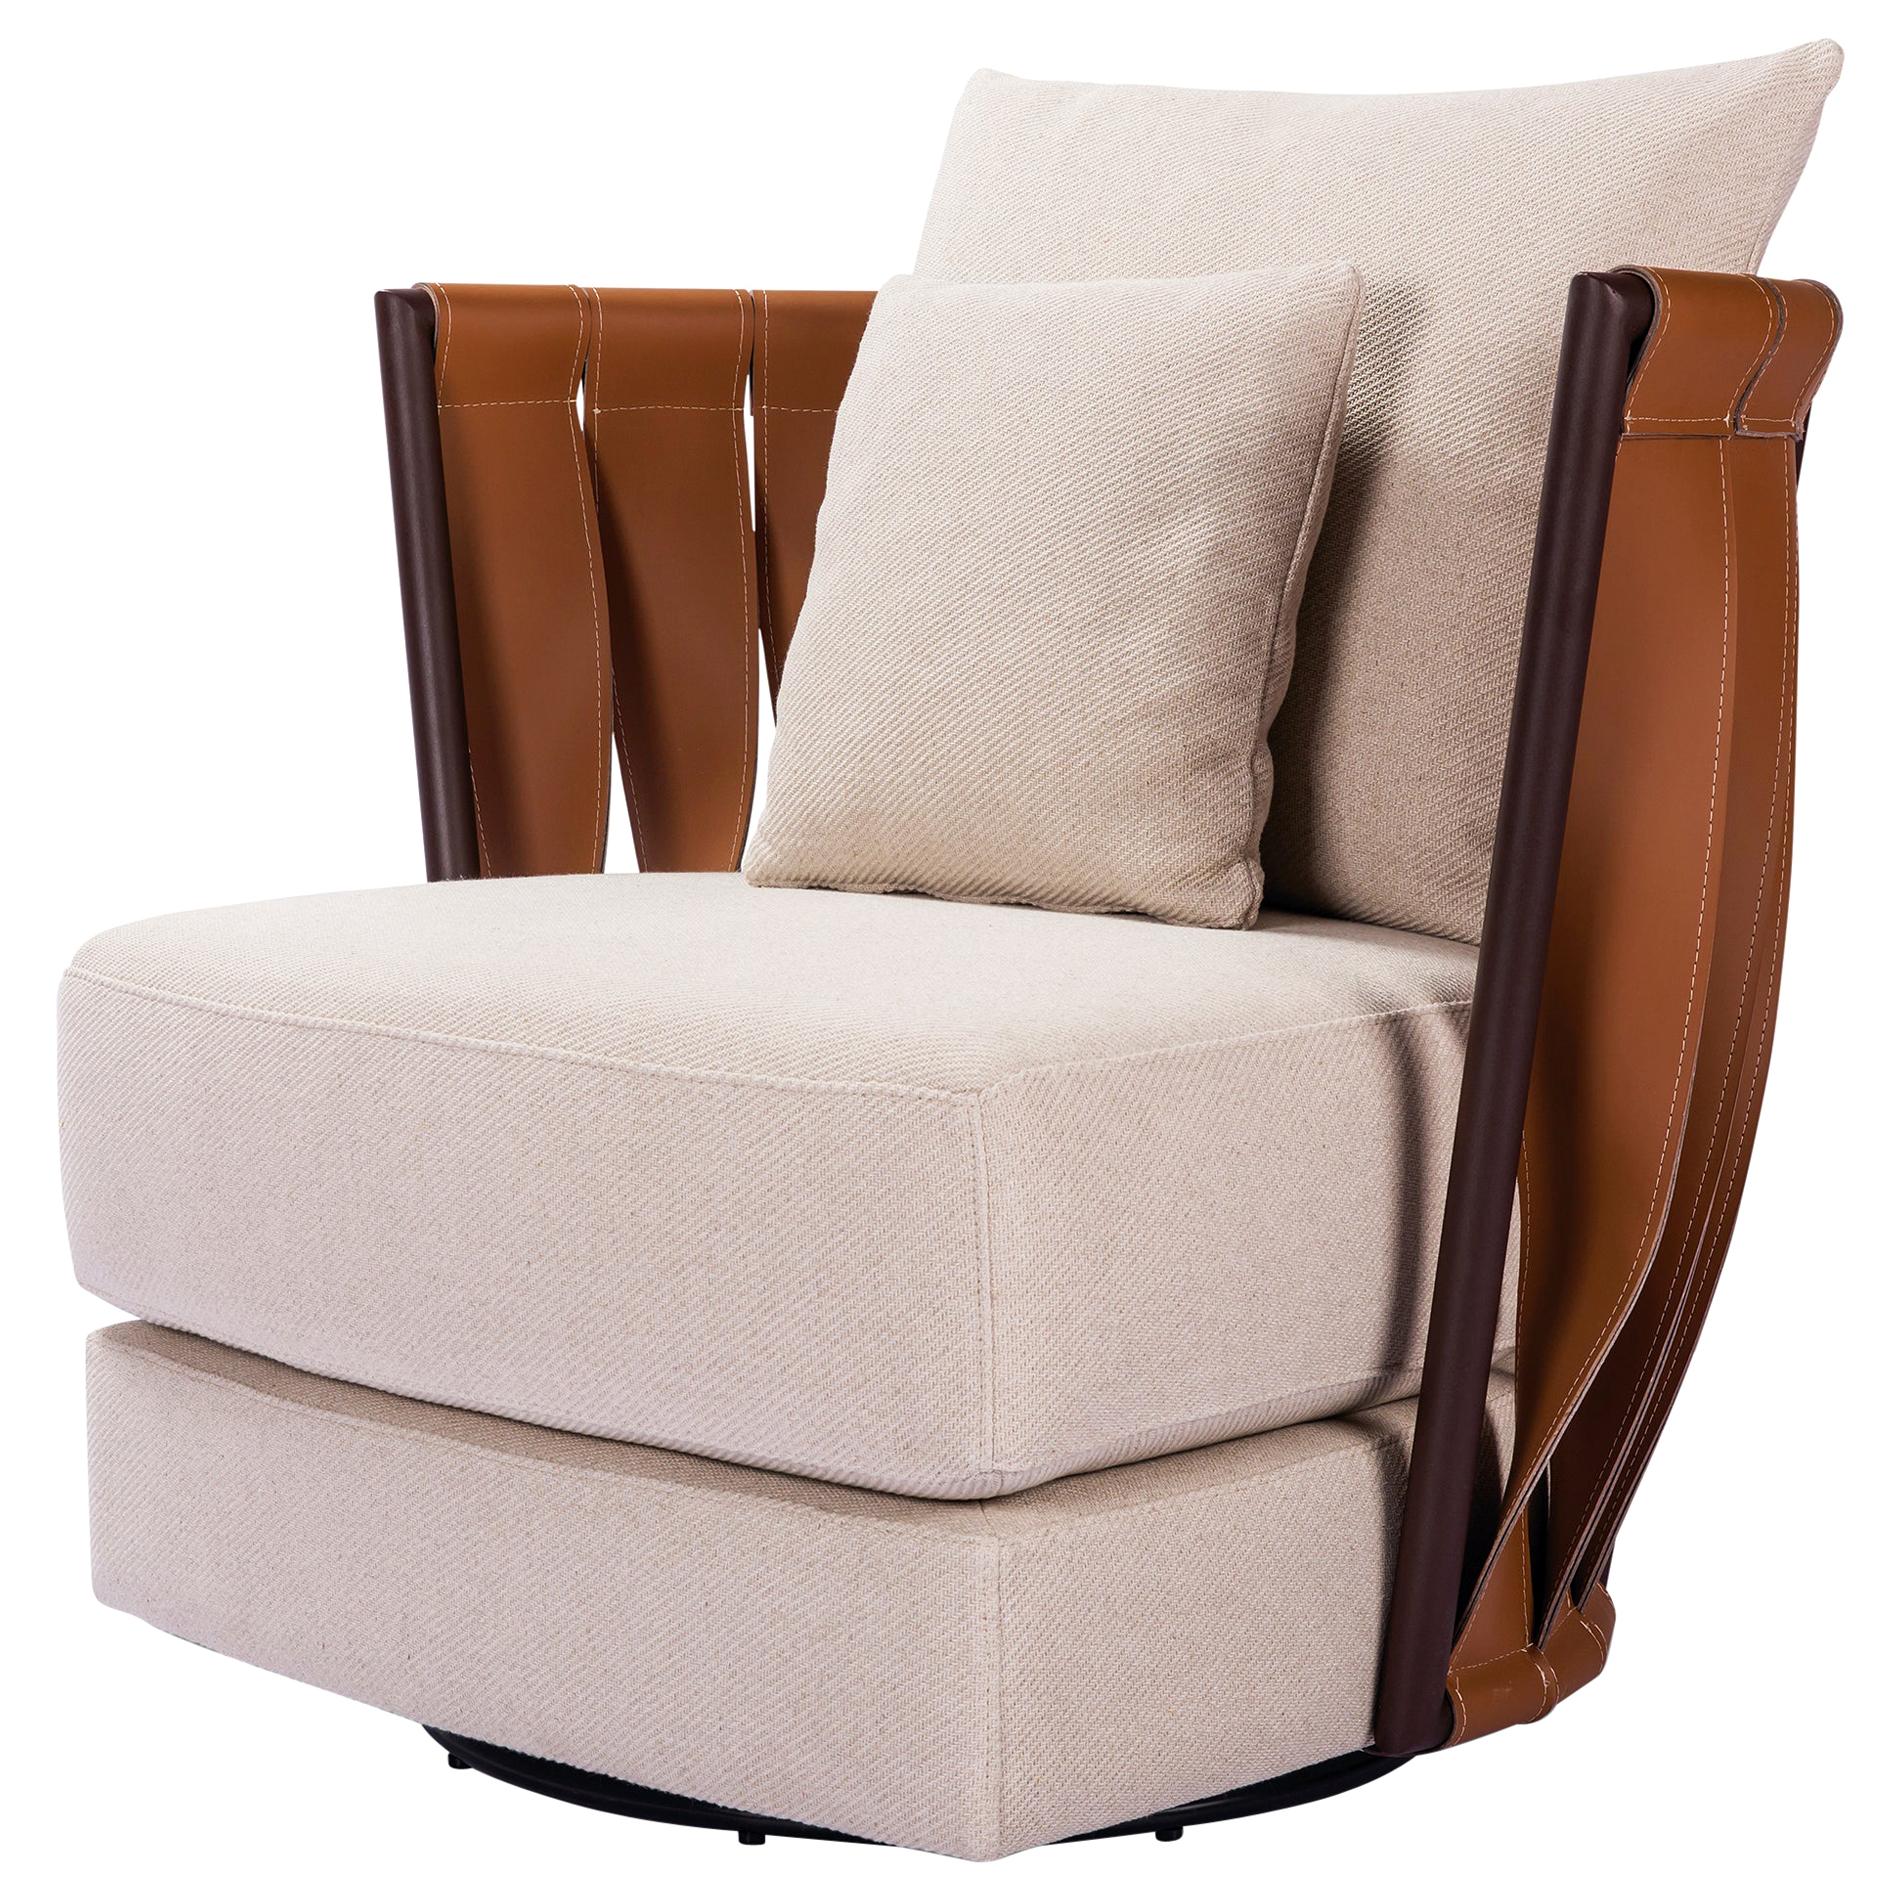 Swivel, Faux Leather Caramel and Fabric Cream Armchair Palla with Decor Cushions For Sale